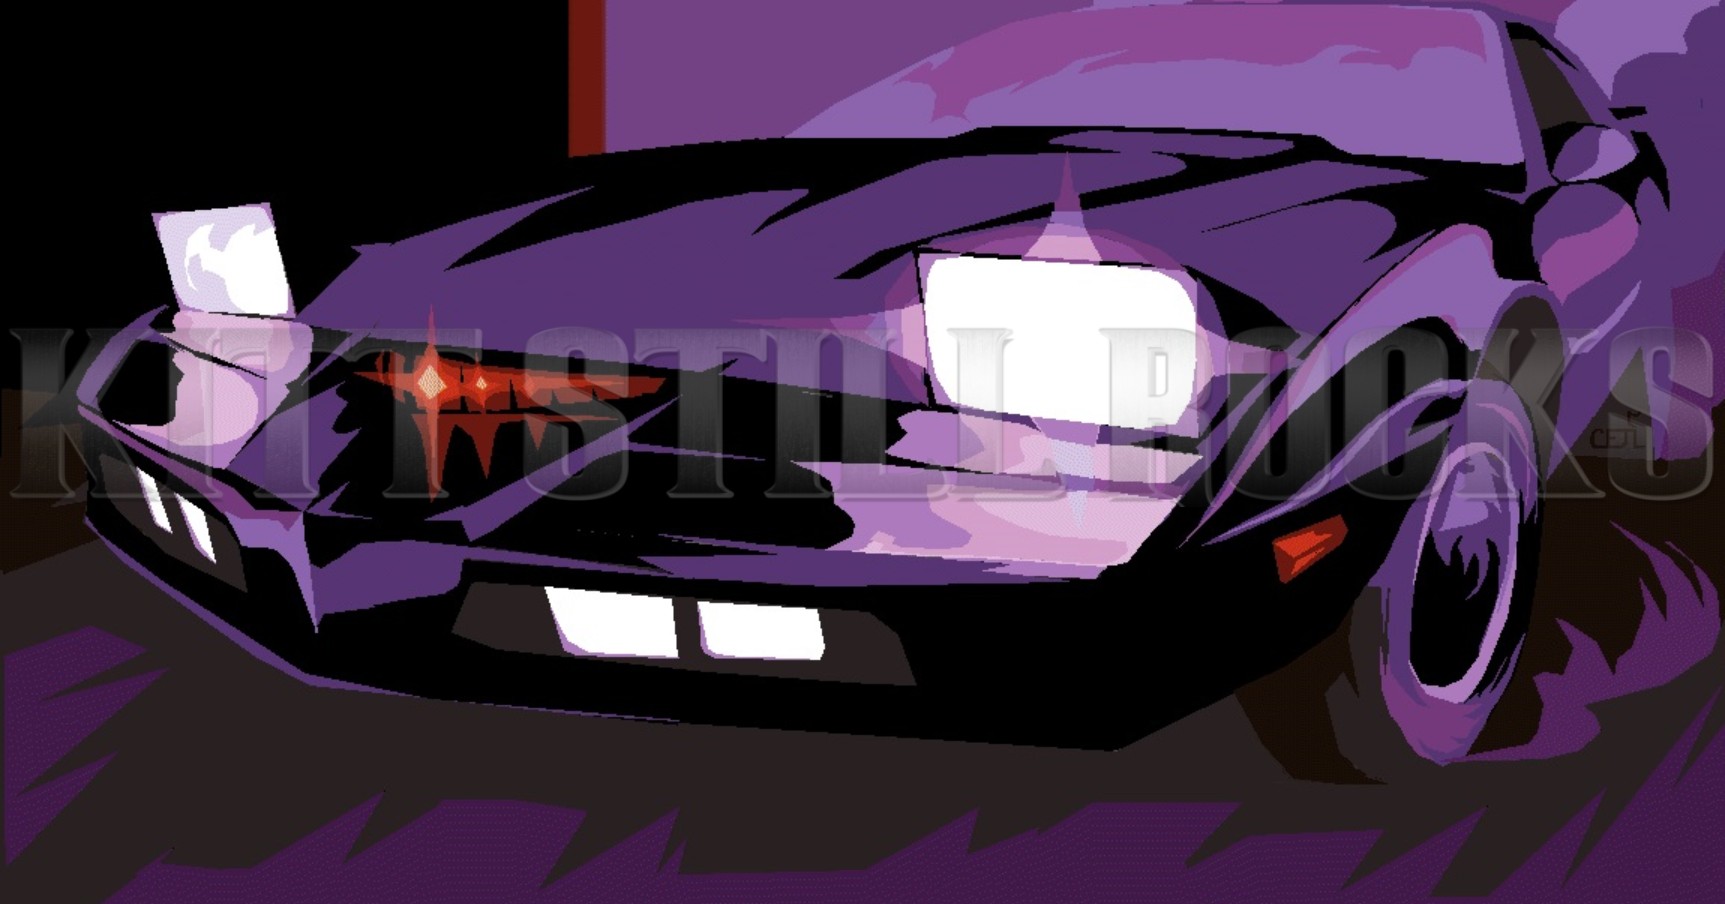 Knight Rider Legacy Blog Book Cover Watermarked